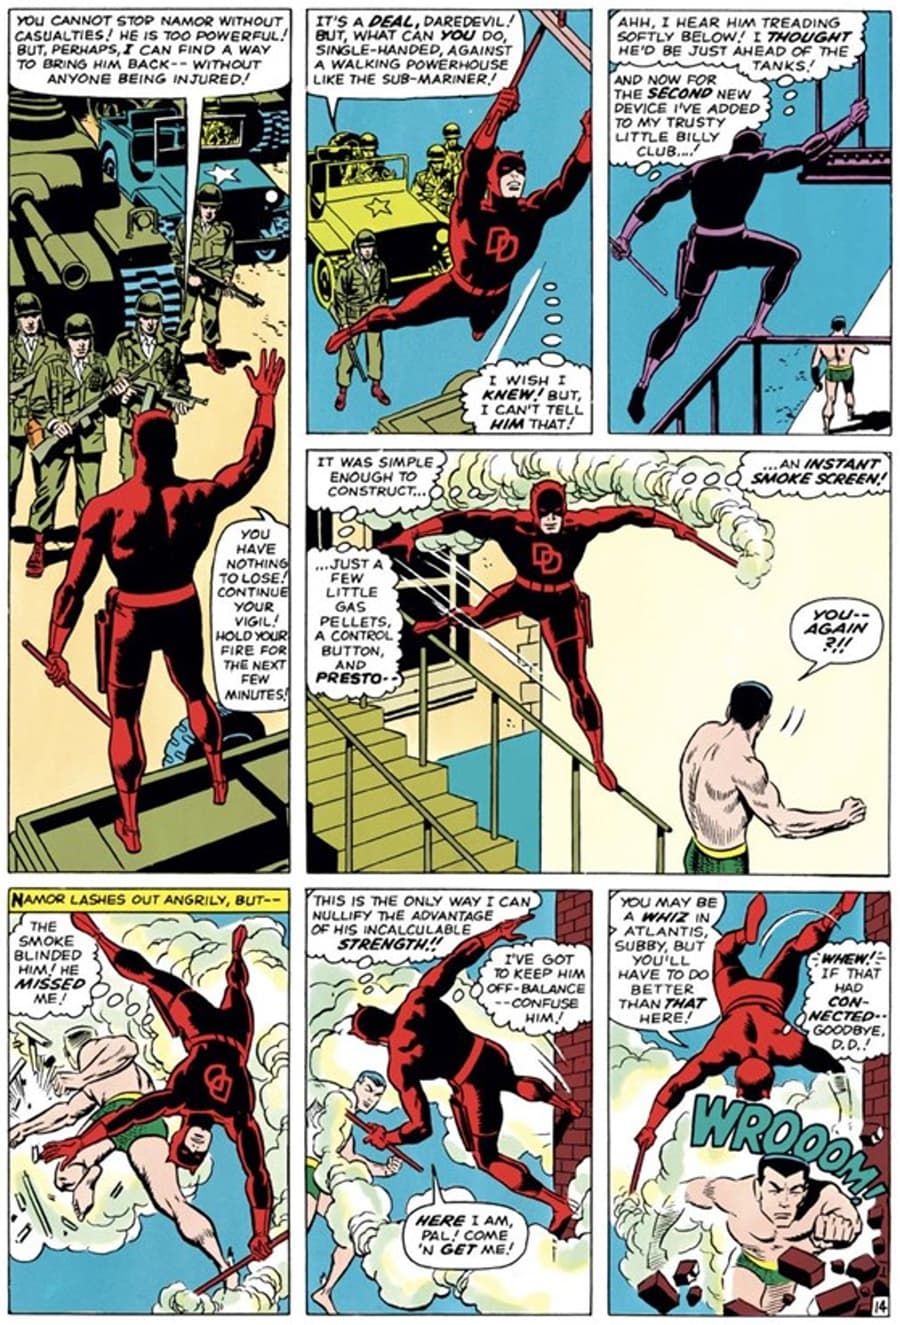 DAREDEVIL (1964) #7 page by Stan Lee and Wally Wood